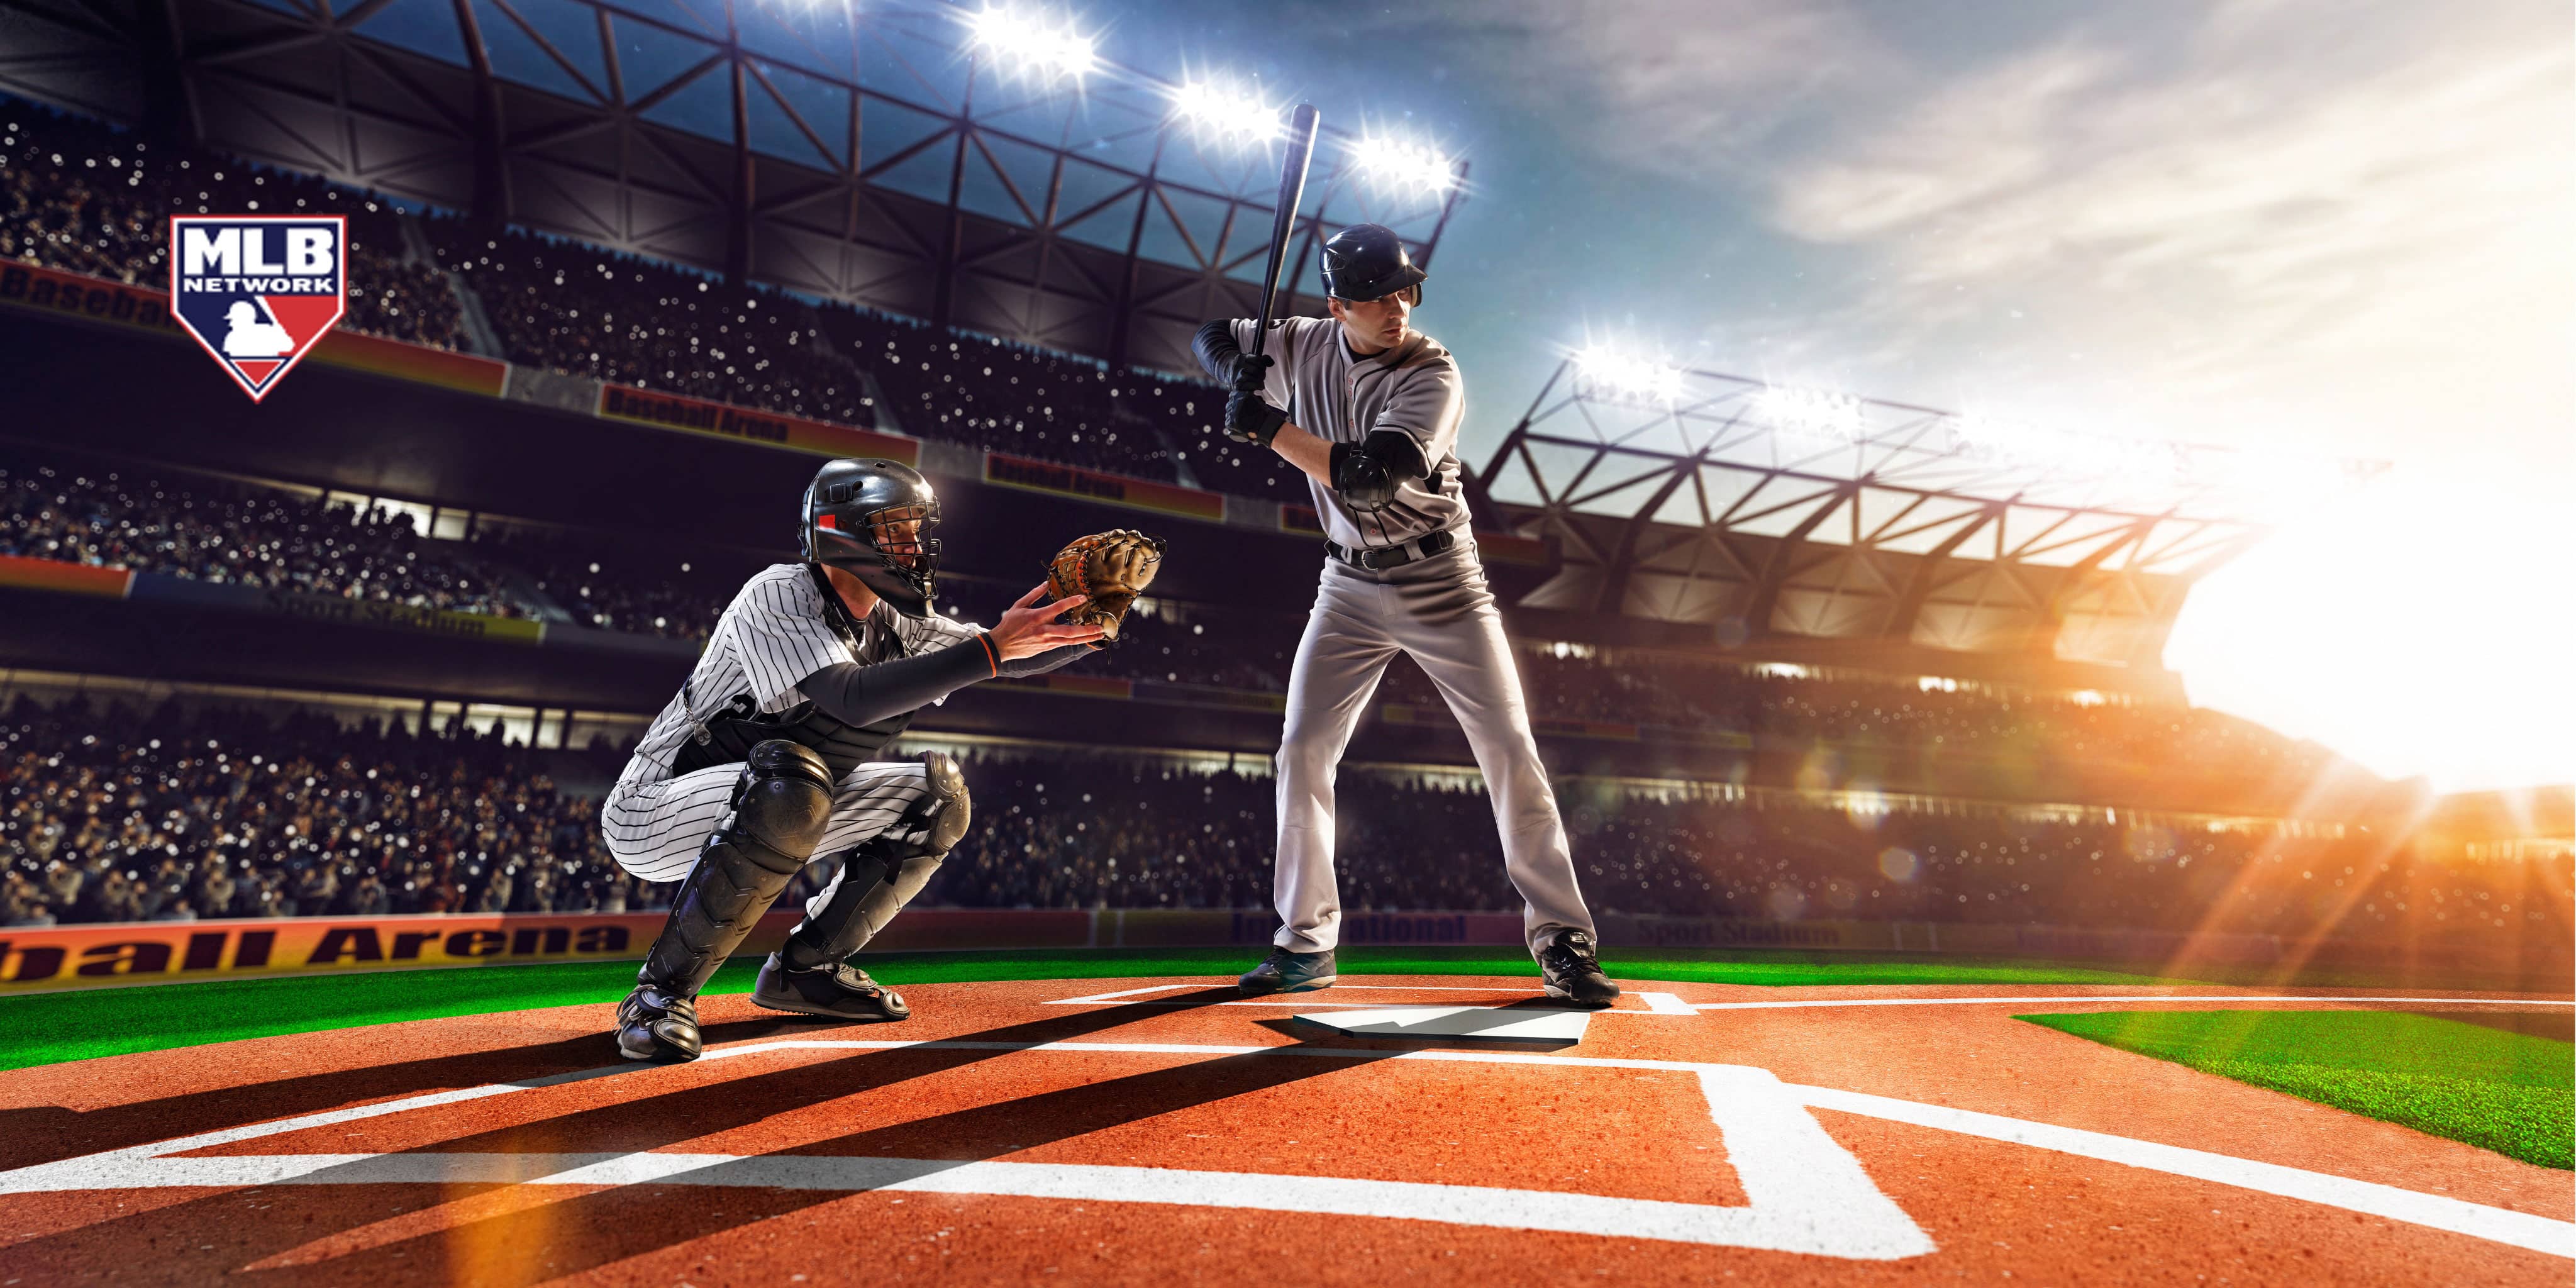 Sports and TV Package Baseball Game